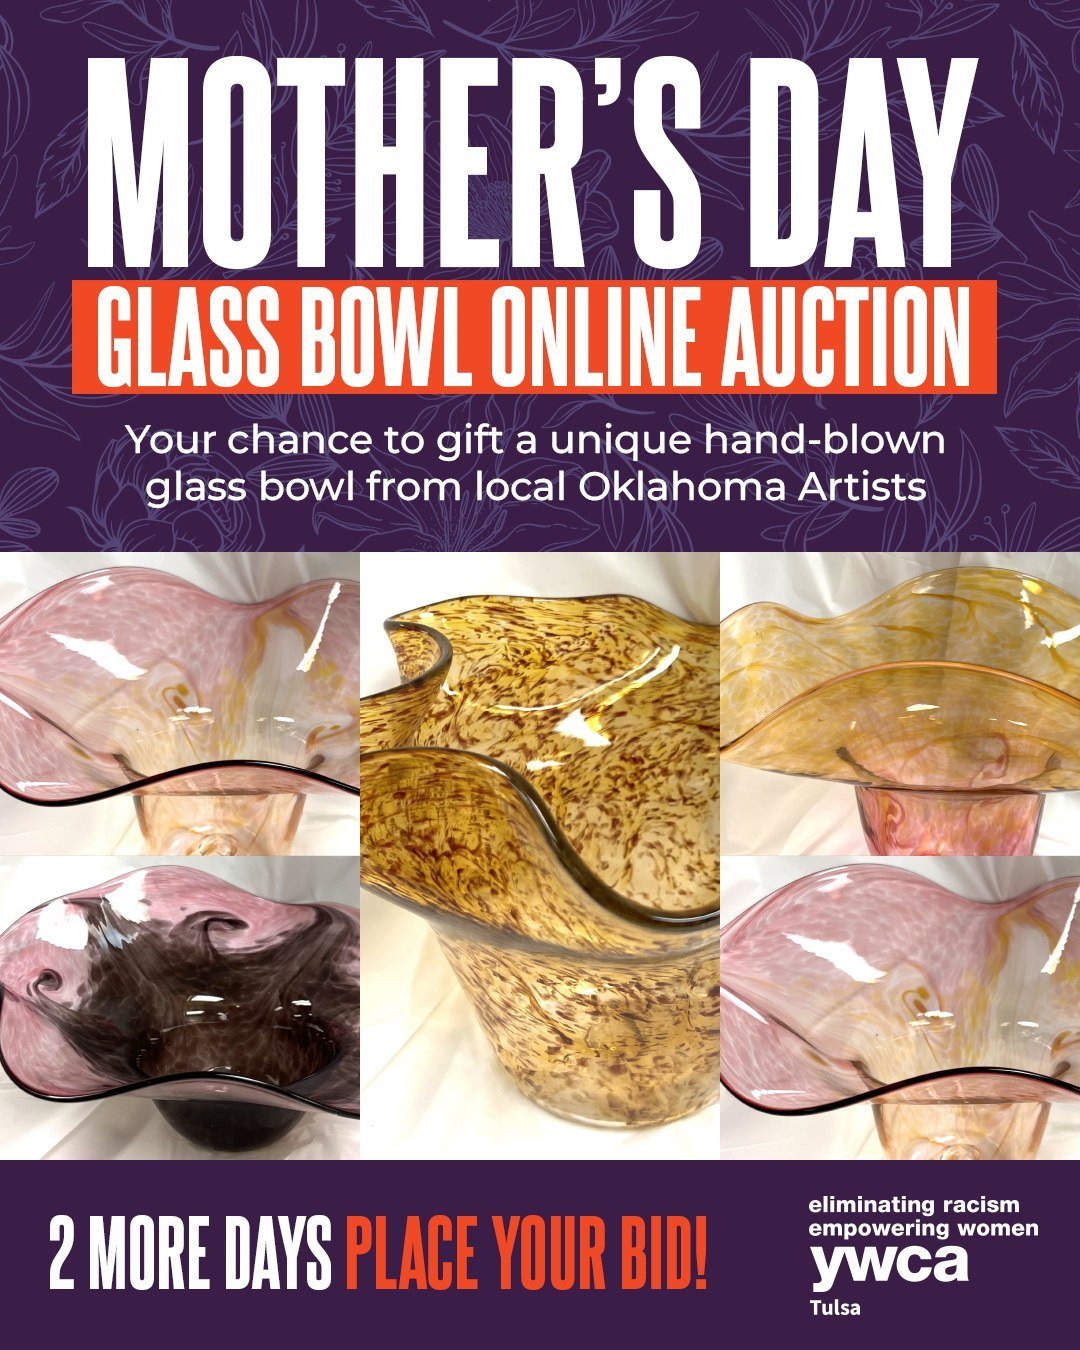 🎉 Only 2 days left! 🎉 Snatch up your chance to own a stunning hand-blown glass bowl crafted by a talented local artist from Oklahoma. 💐 Don't wait till it's too late &ndash; make Mom's day extra special with this unique gift! 🎁 Place your bids or